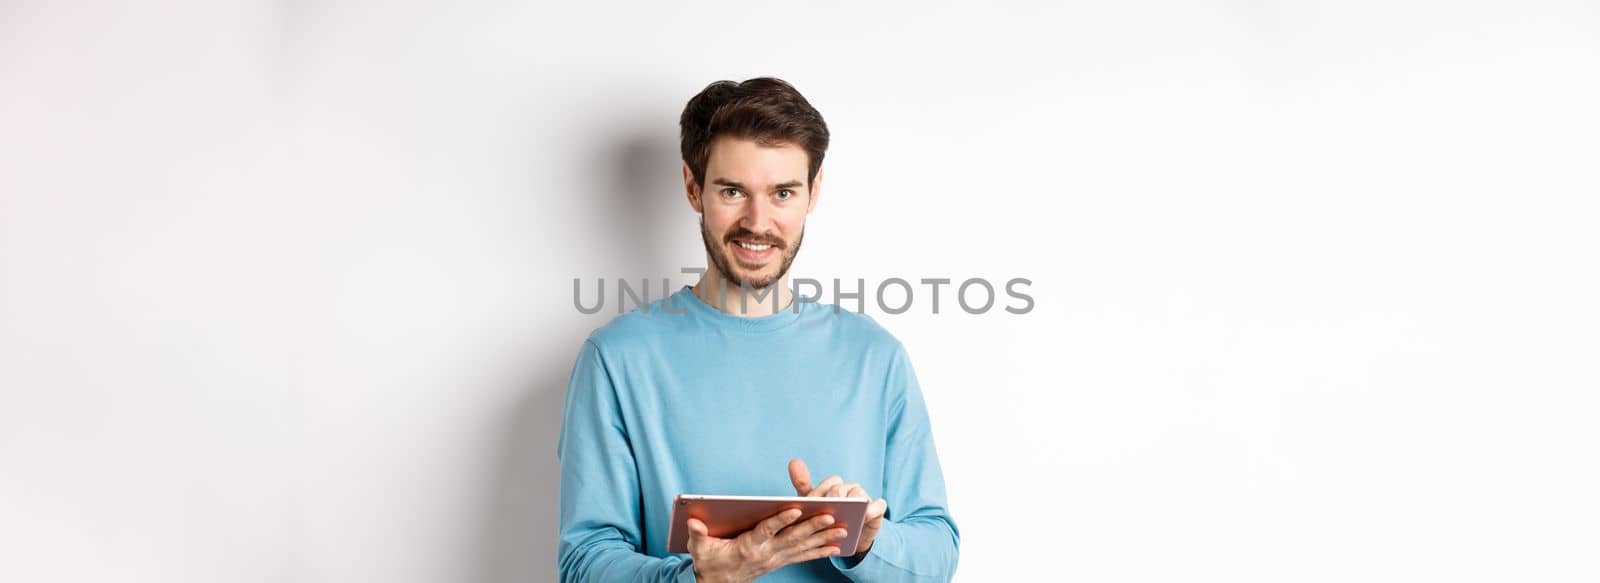 E-commerce. Smiling caucasian man using digital tablet and looking at camera, standing on white background.